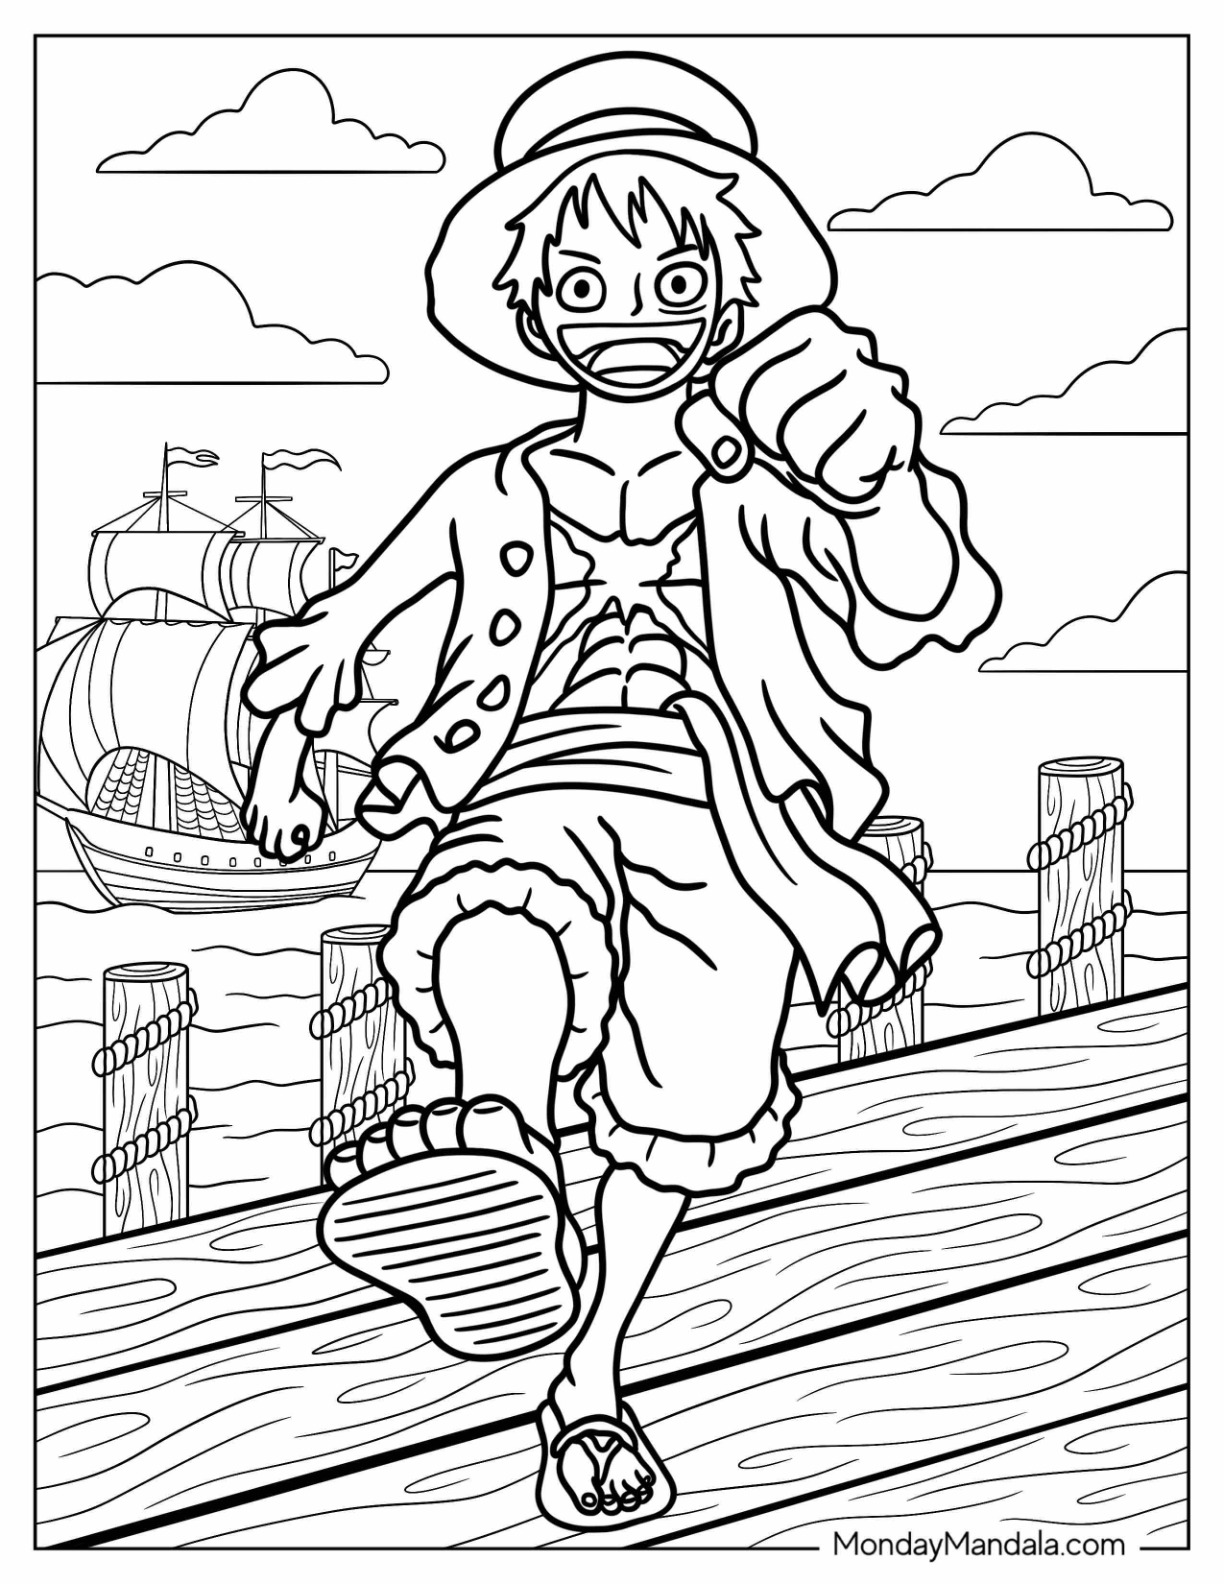 30 One Piece Coloring Pages (Free PDF ...